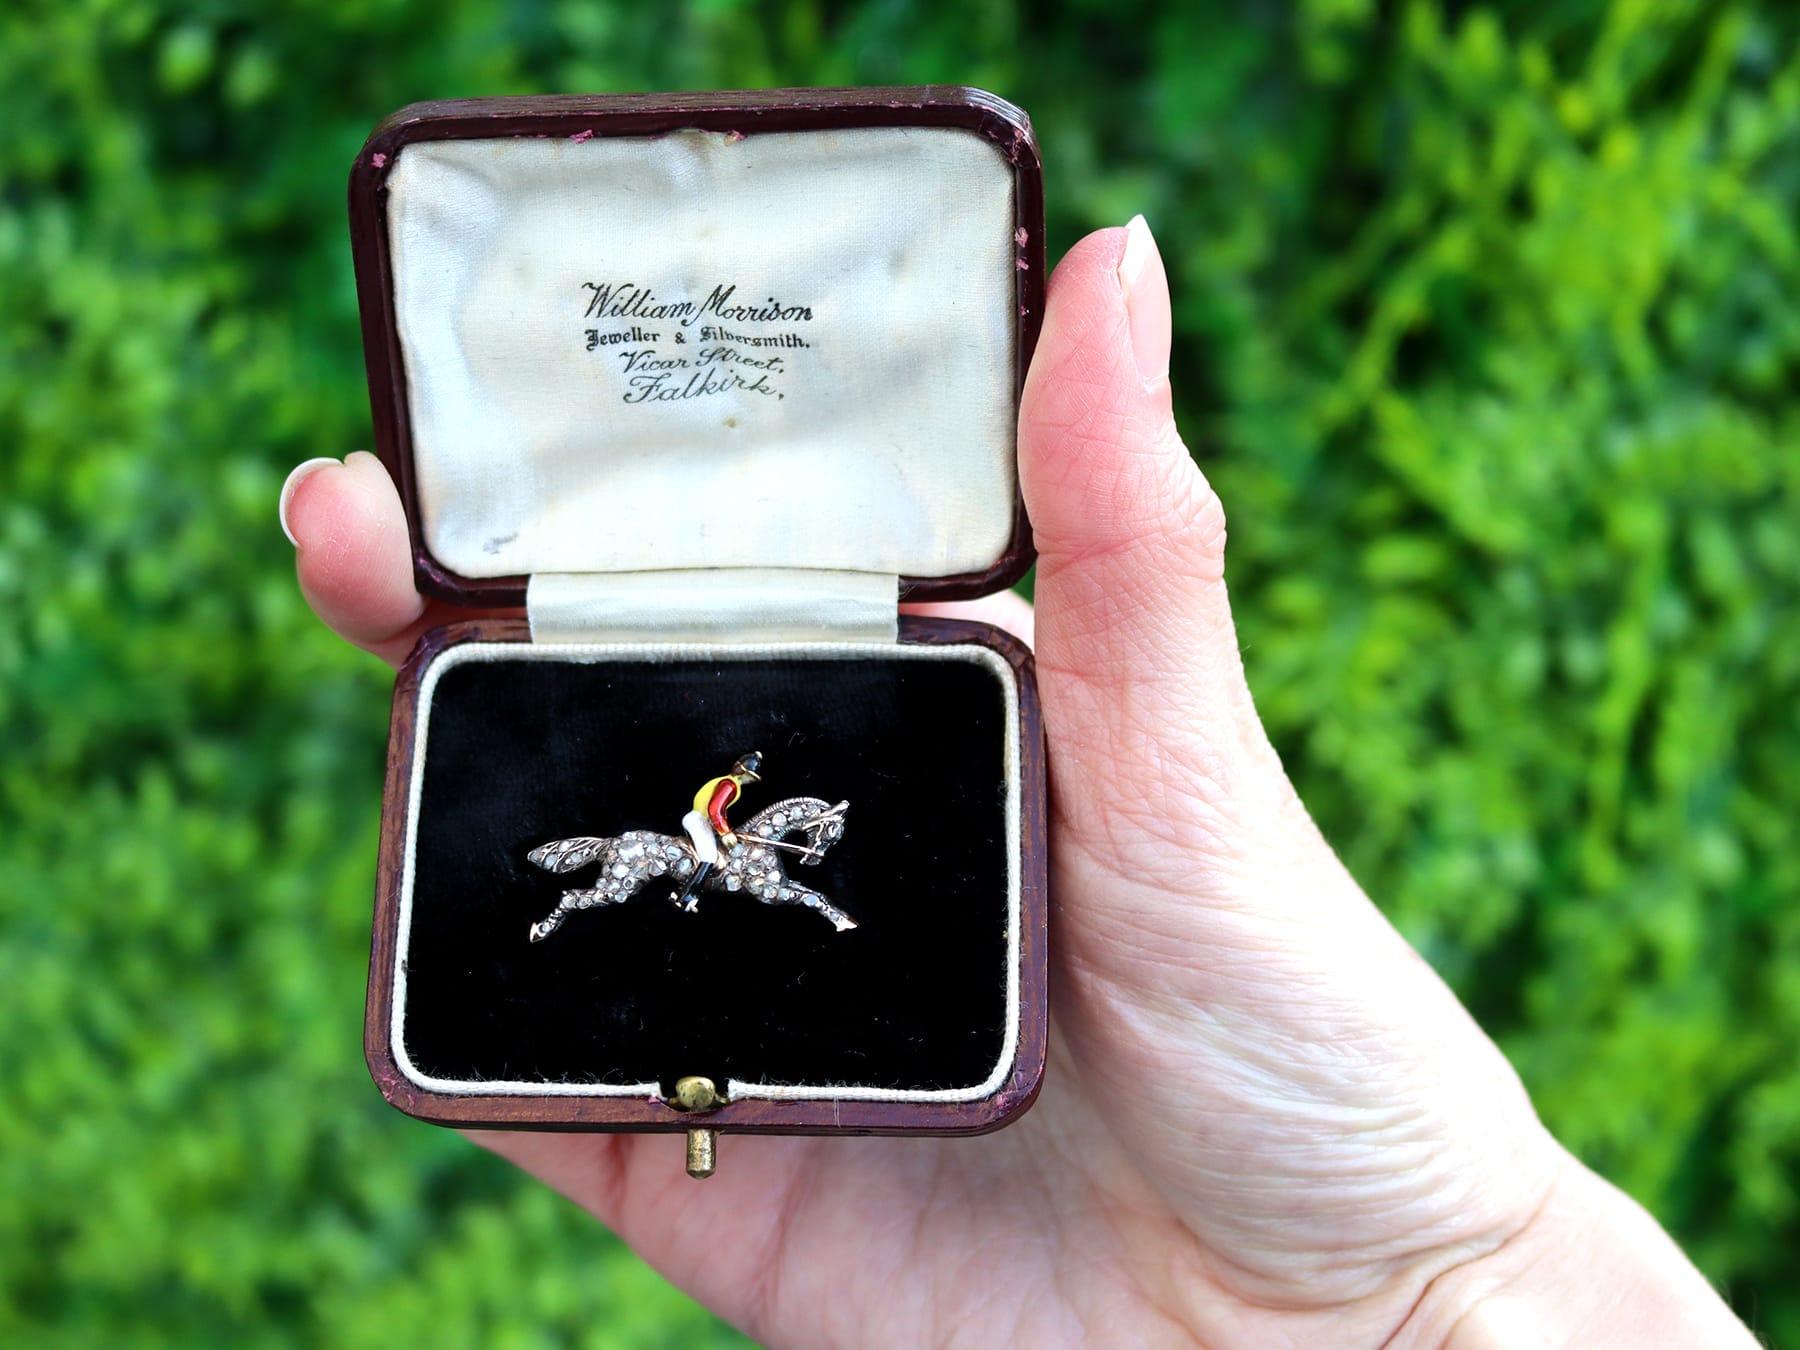 A fine and impressive 0.52 carat diamond and enamel, 12 karat yellow gold and silver set jockey brooch - boxed; part of our diverse antique jewellery collections.

This fine and impressive jockey and horse brooch has been crafted in 12k yellow gold